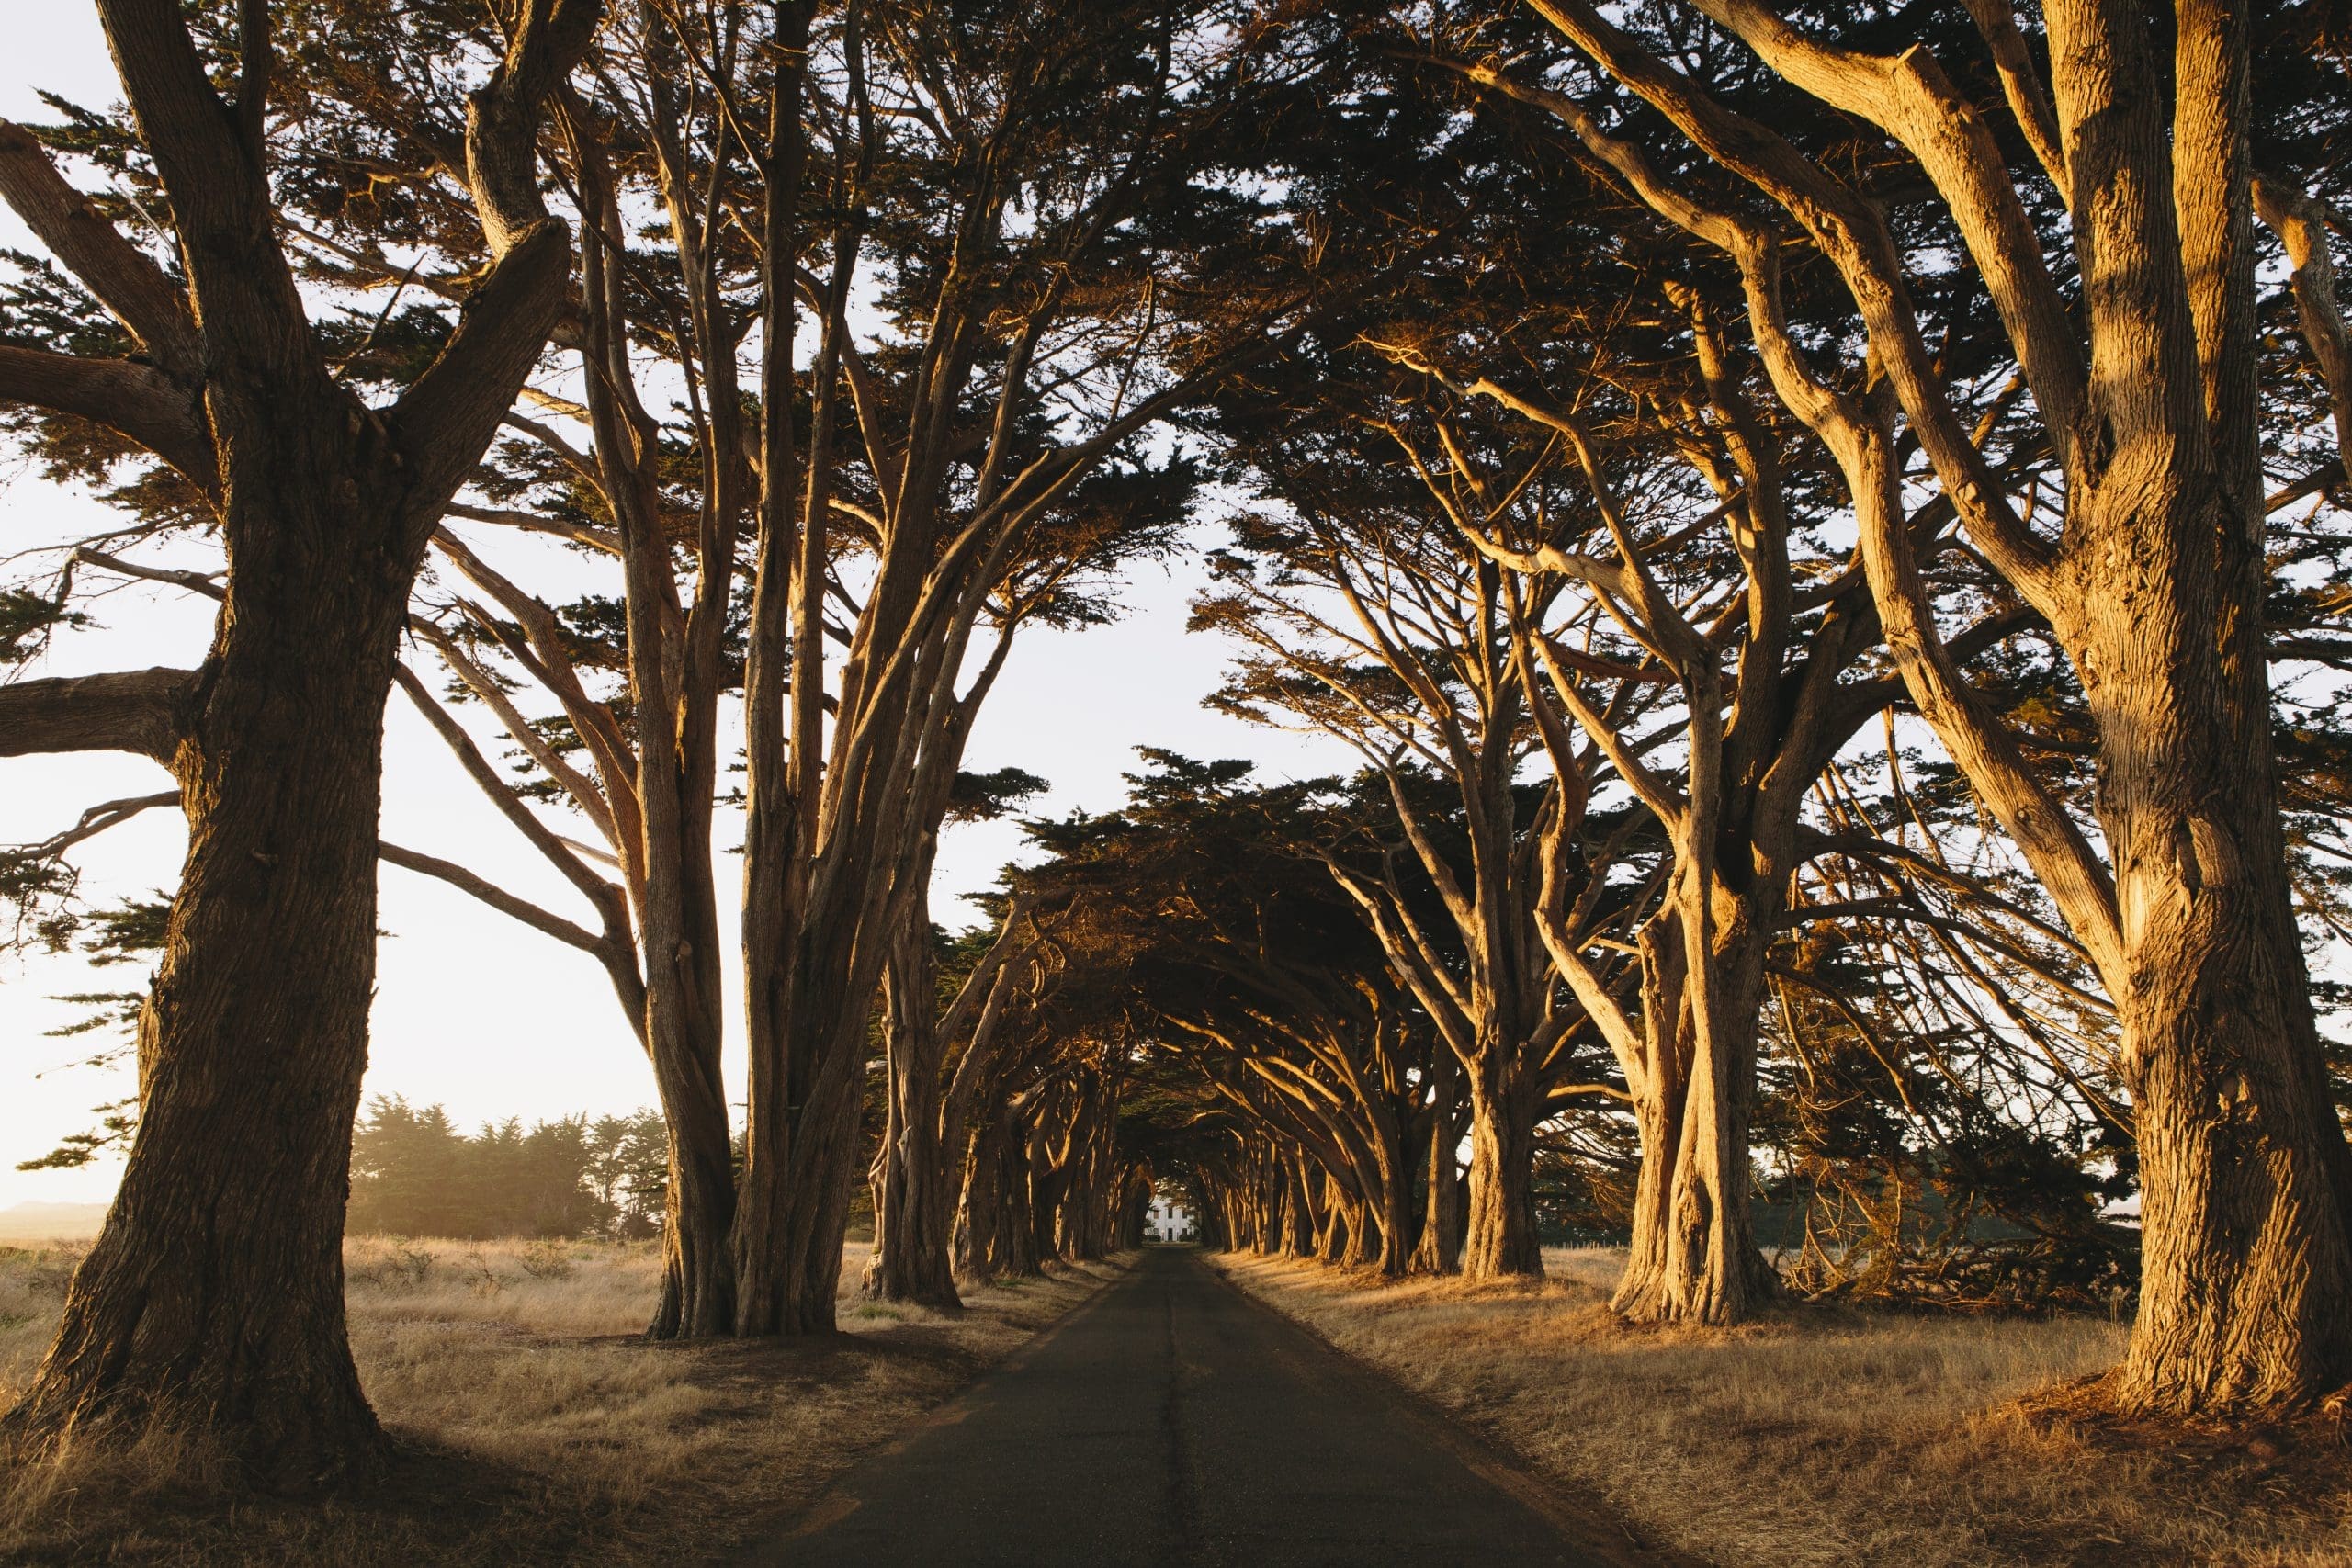 A tunnel of cypress trees which have grown together over the road, dusk in Warwick, RI